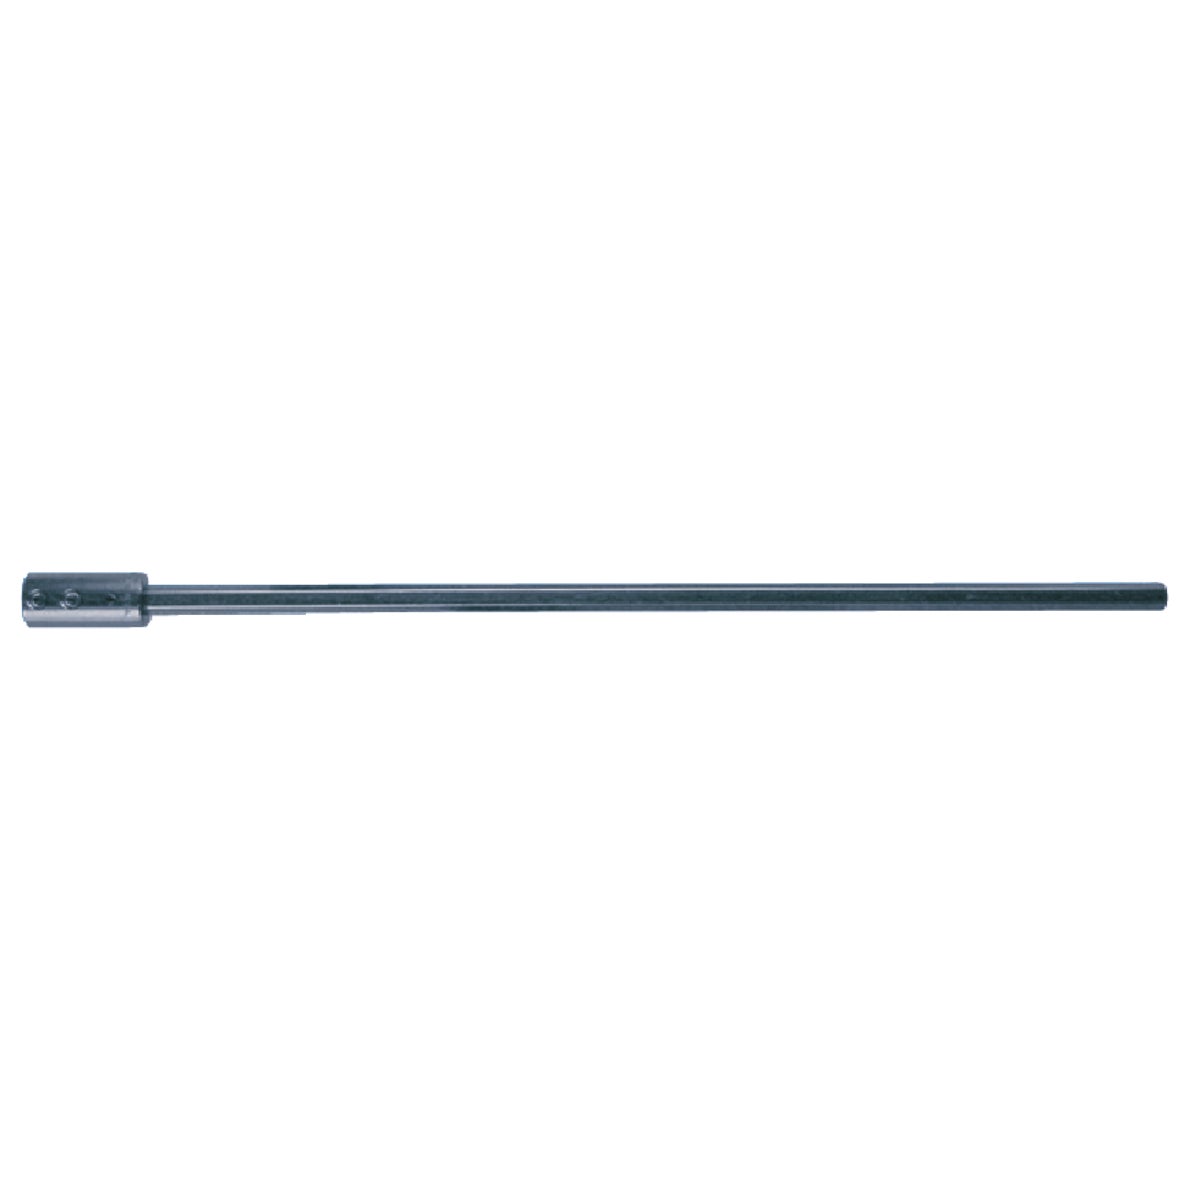 Lenox 18 In. Hole Saw Mandrel Extension for 1/2 In. Chuck